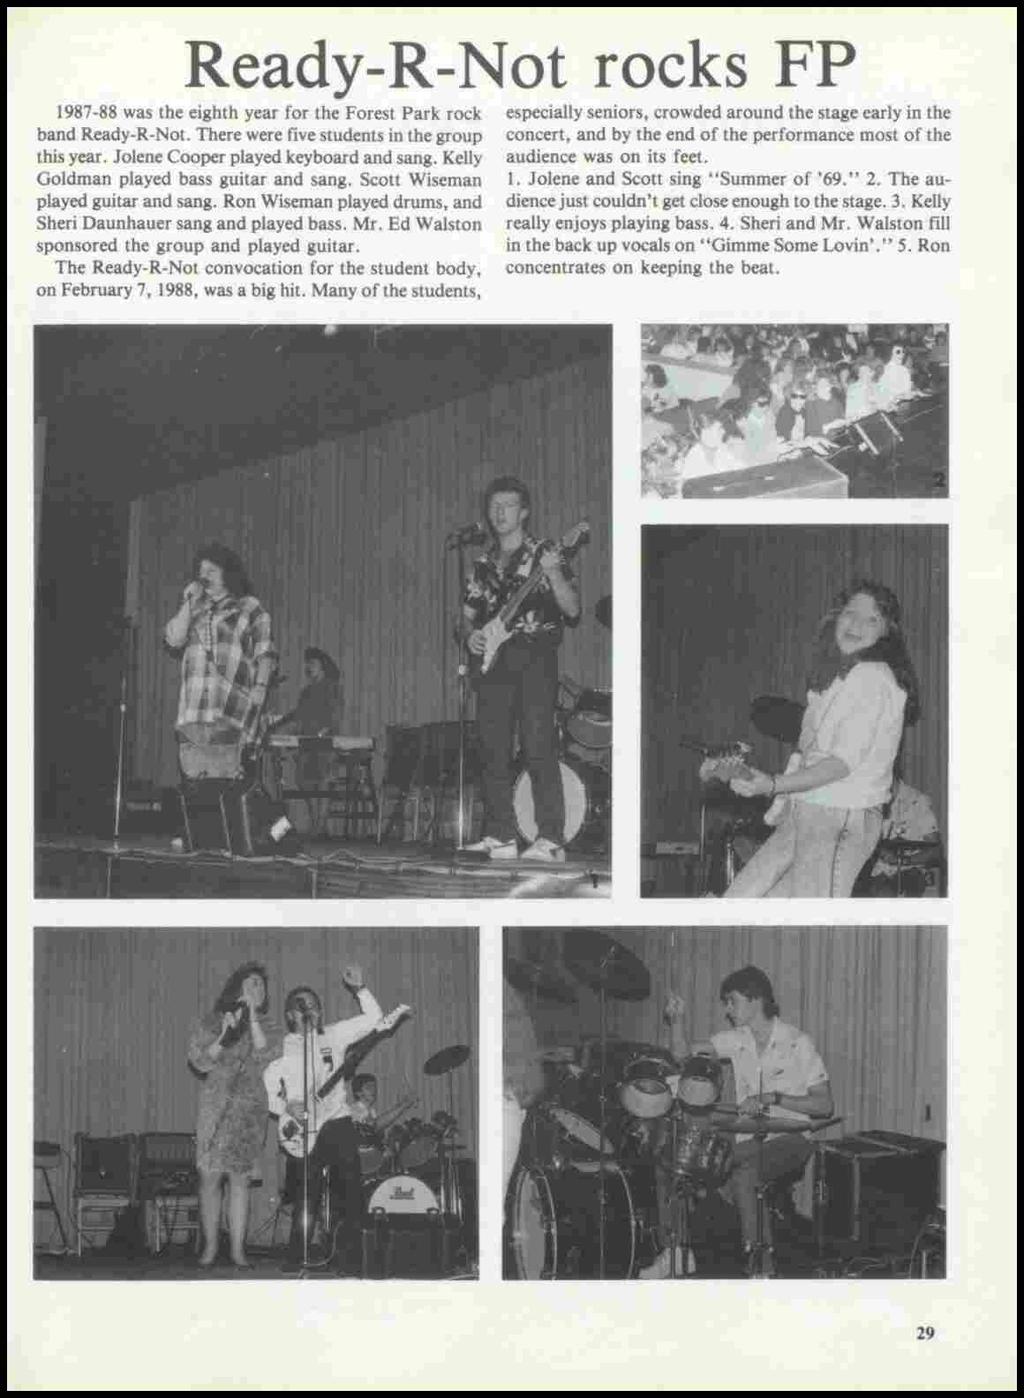 Ready-R-Not rocks FP 1987-88 was the eighth year for the Forest Park rock band Ready-R-Not. There were five students in the group this year. Jolene Cooper played keyboard and sang.